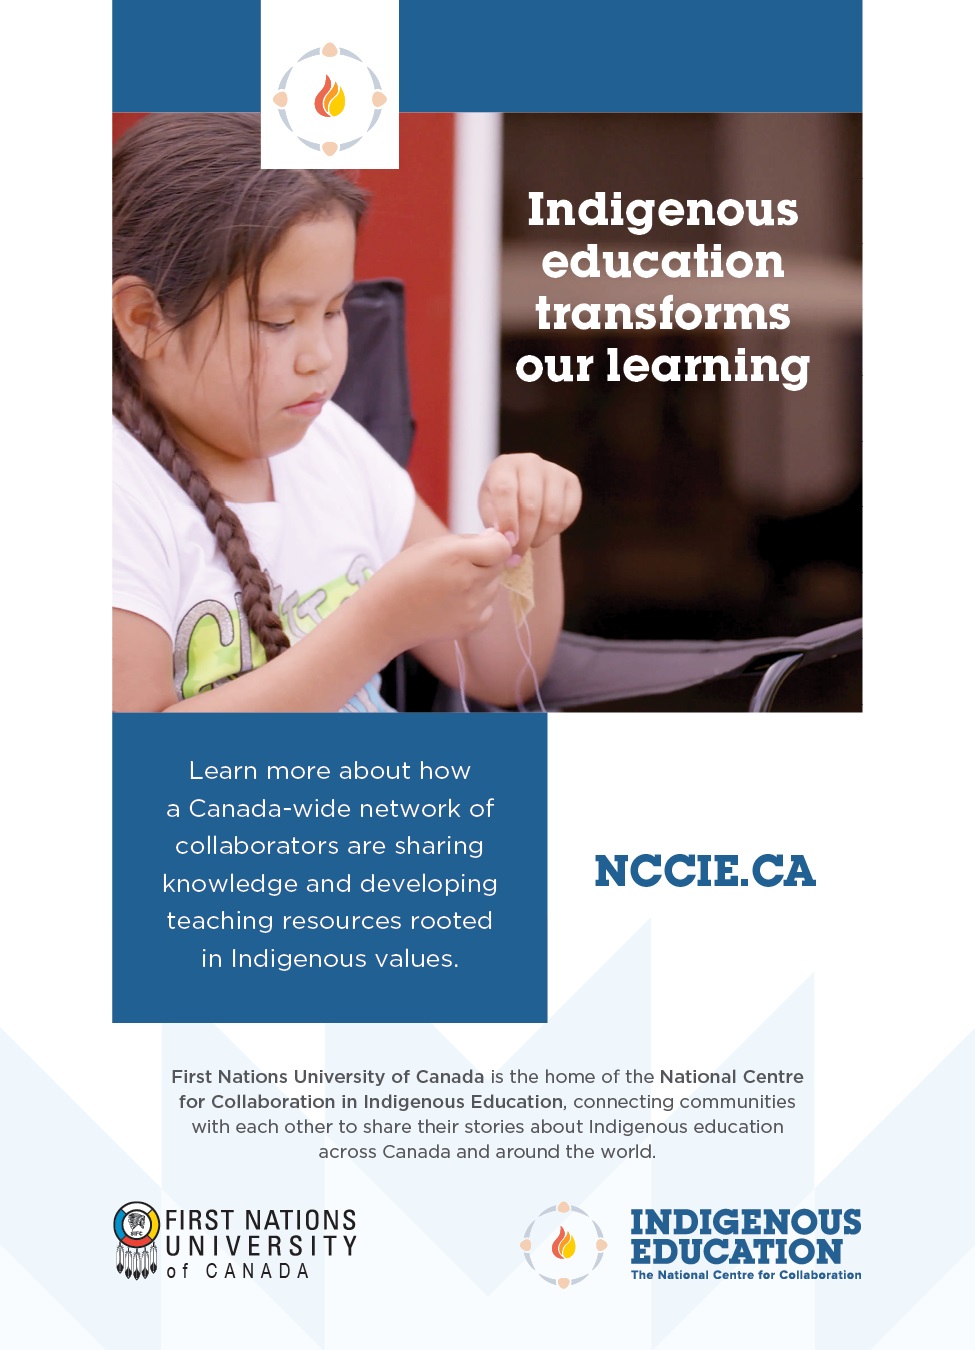 poster image with indigenous student sewing